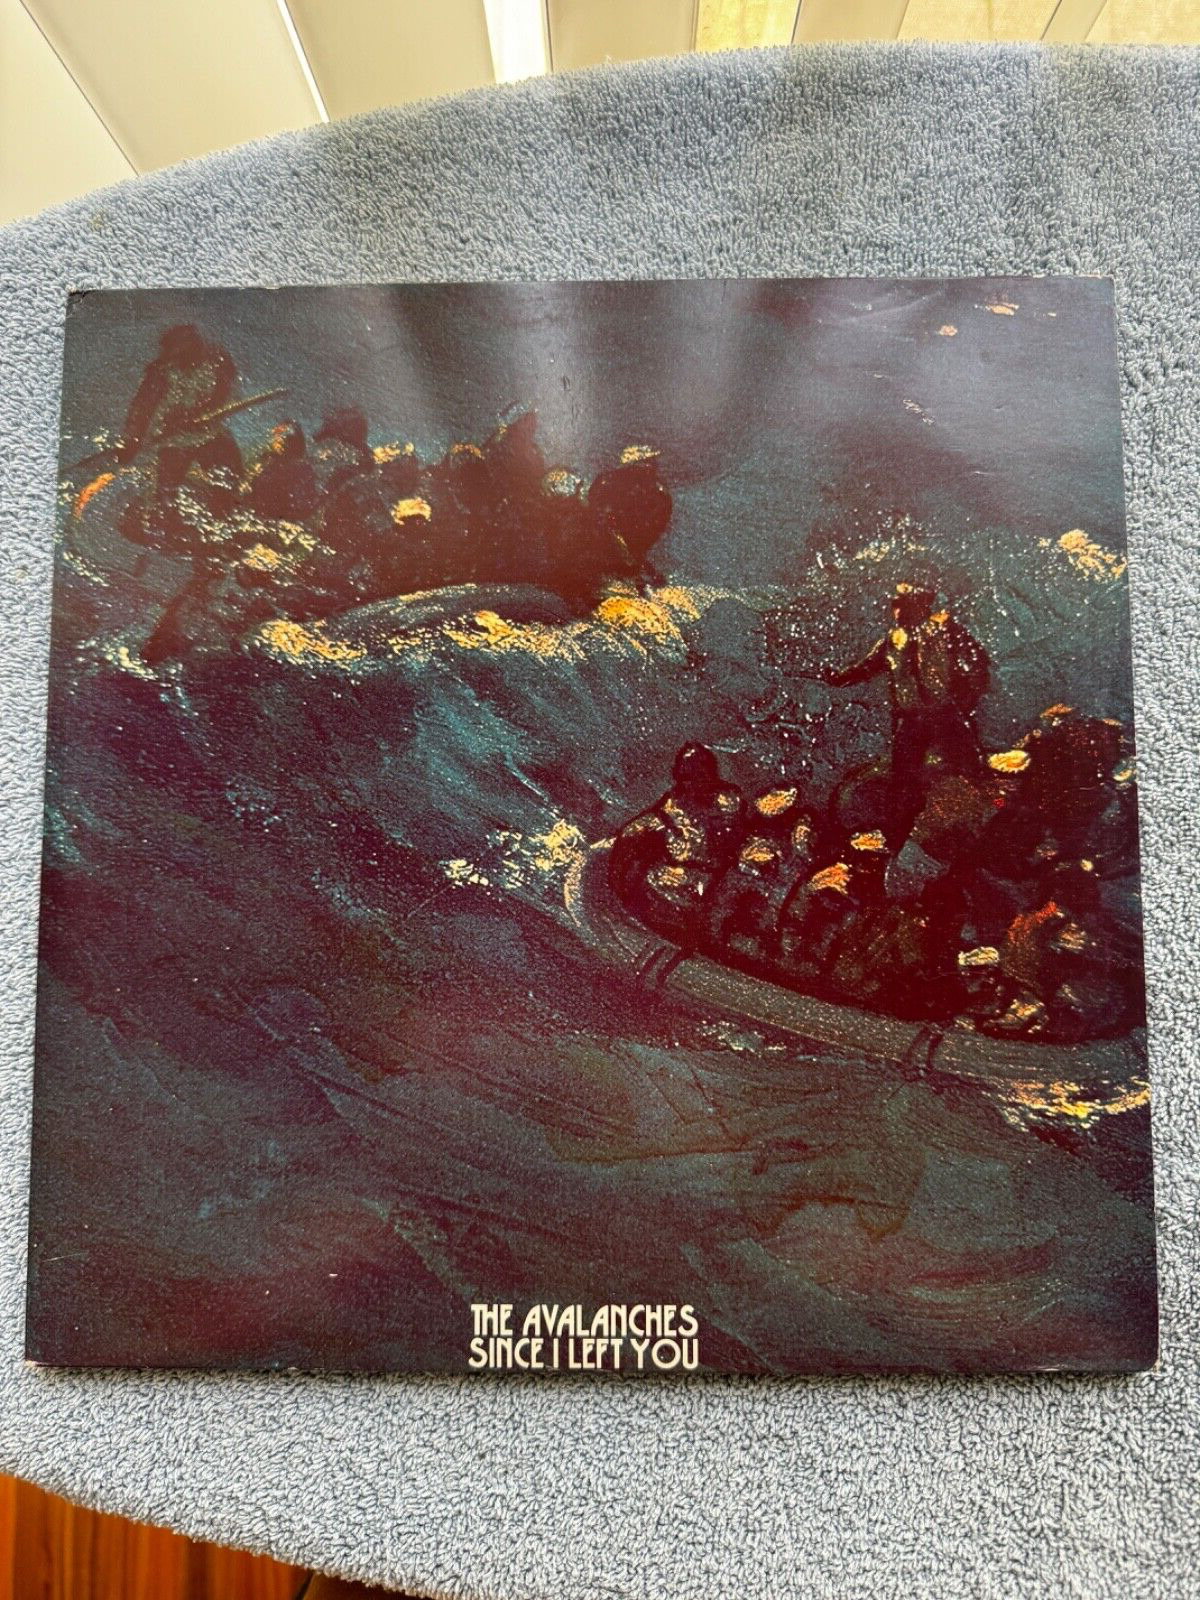 VERY Rare 2001 UK FIRST PRESS - The Avalanches - Since I Left You - XL Records